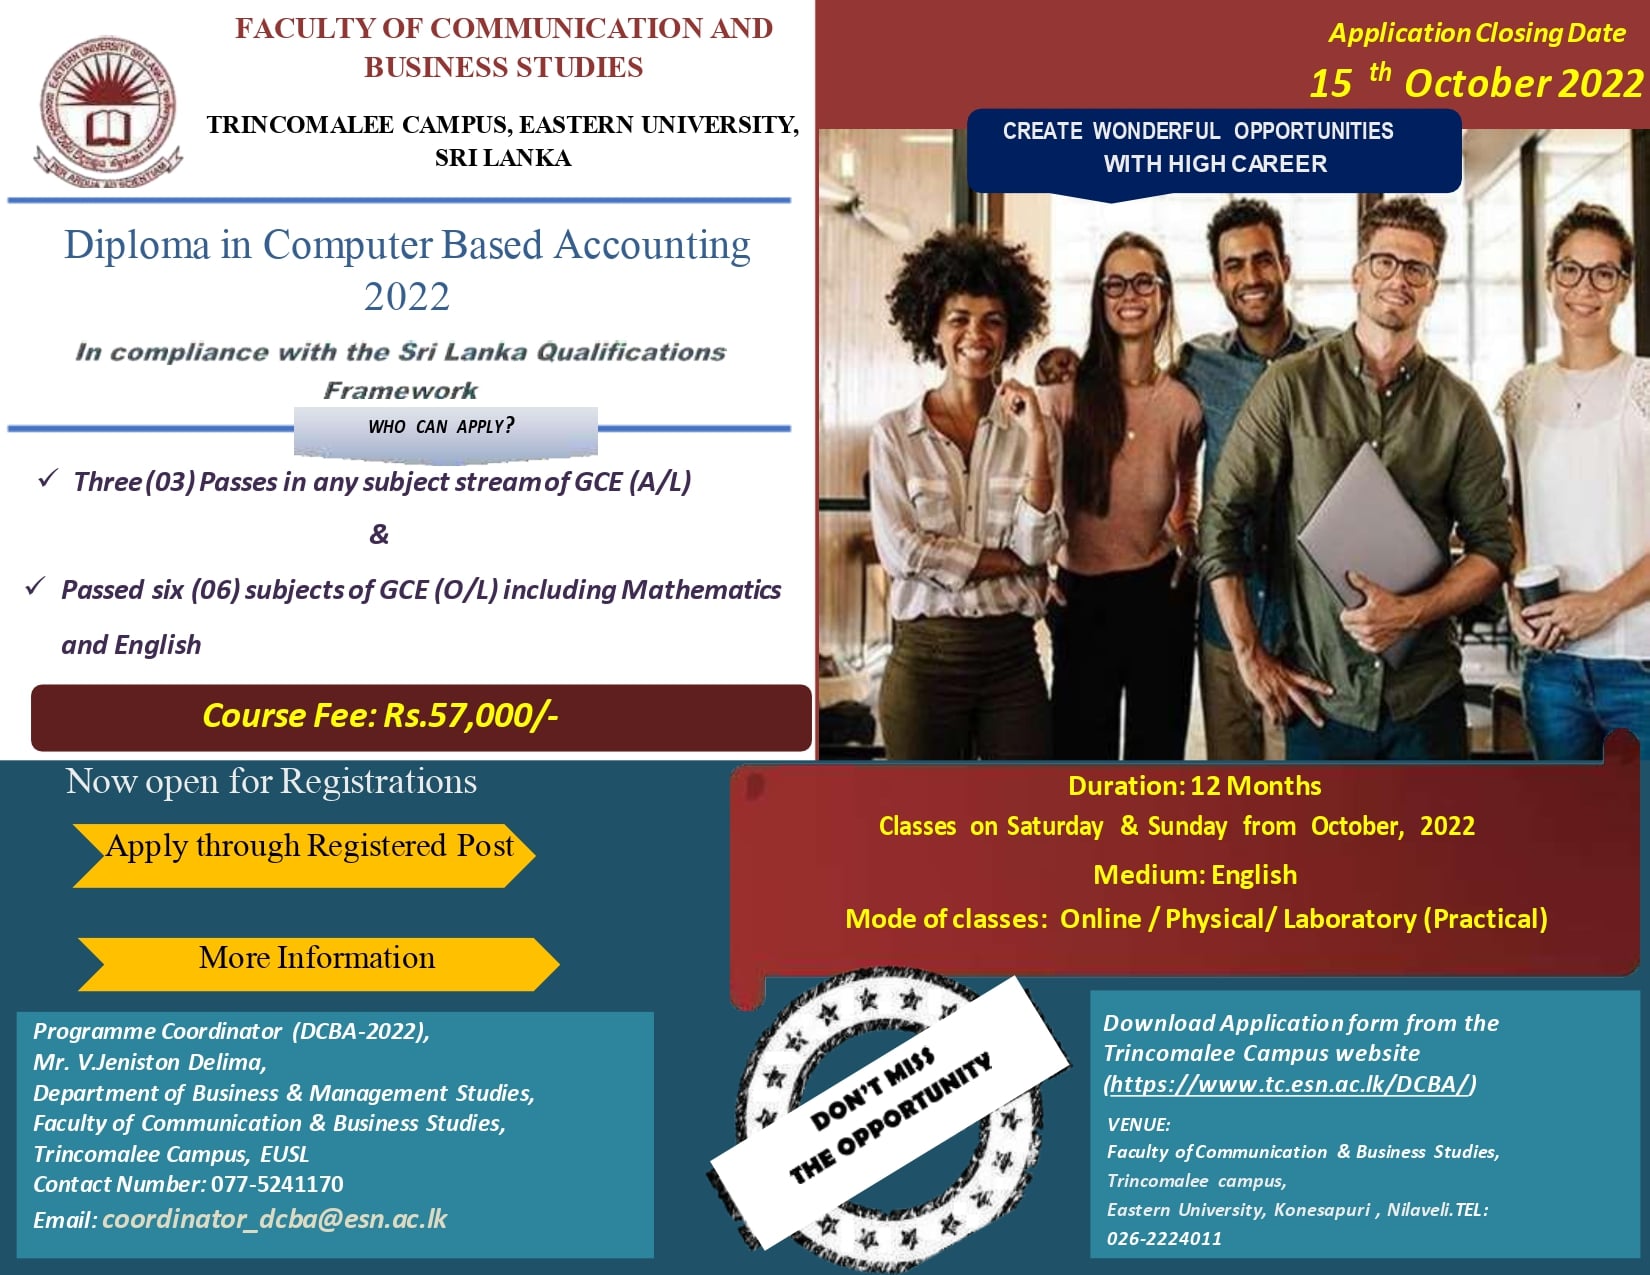 Diploma in Computer Based Accounting 2022 - Eastern University Courses Details